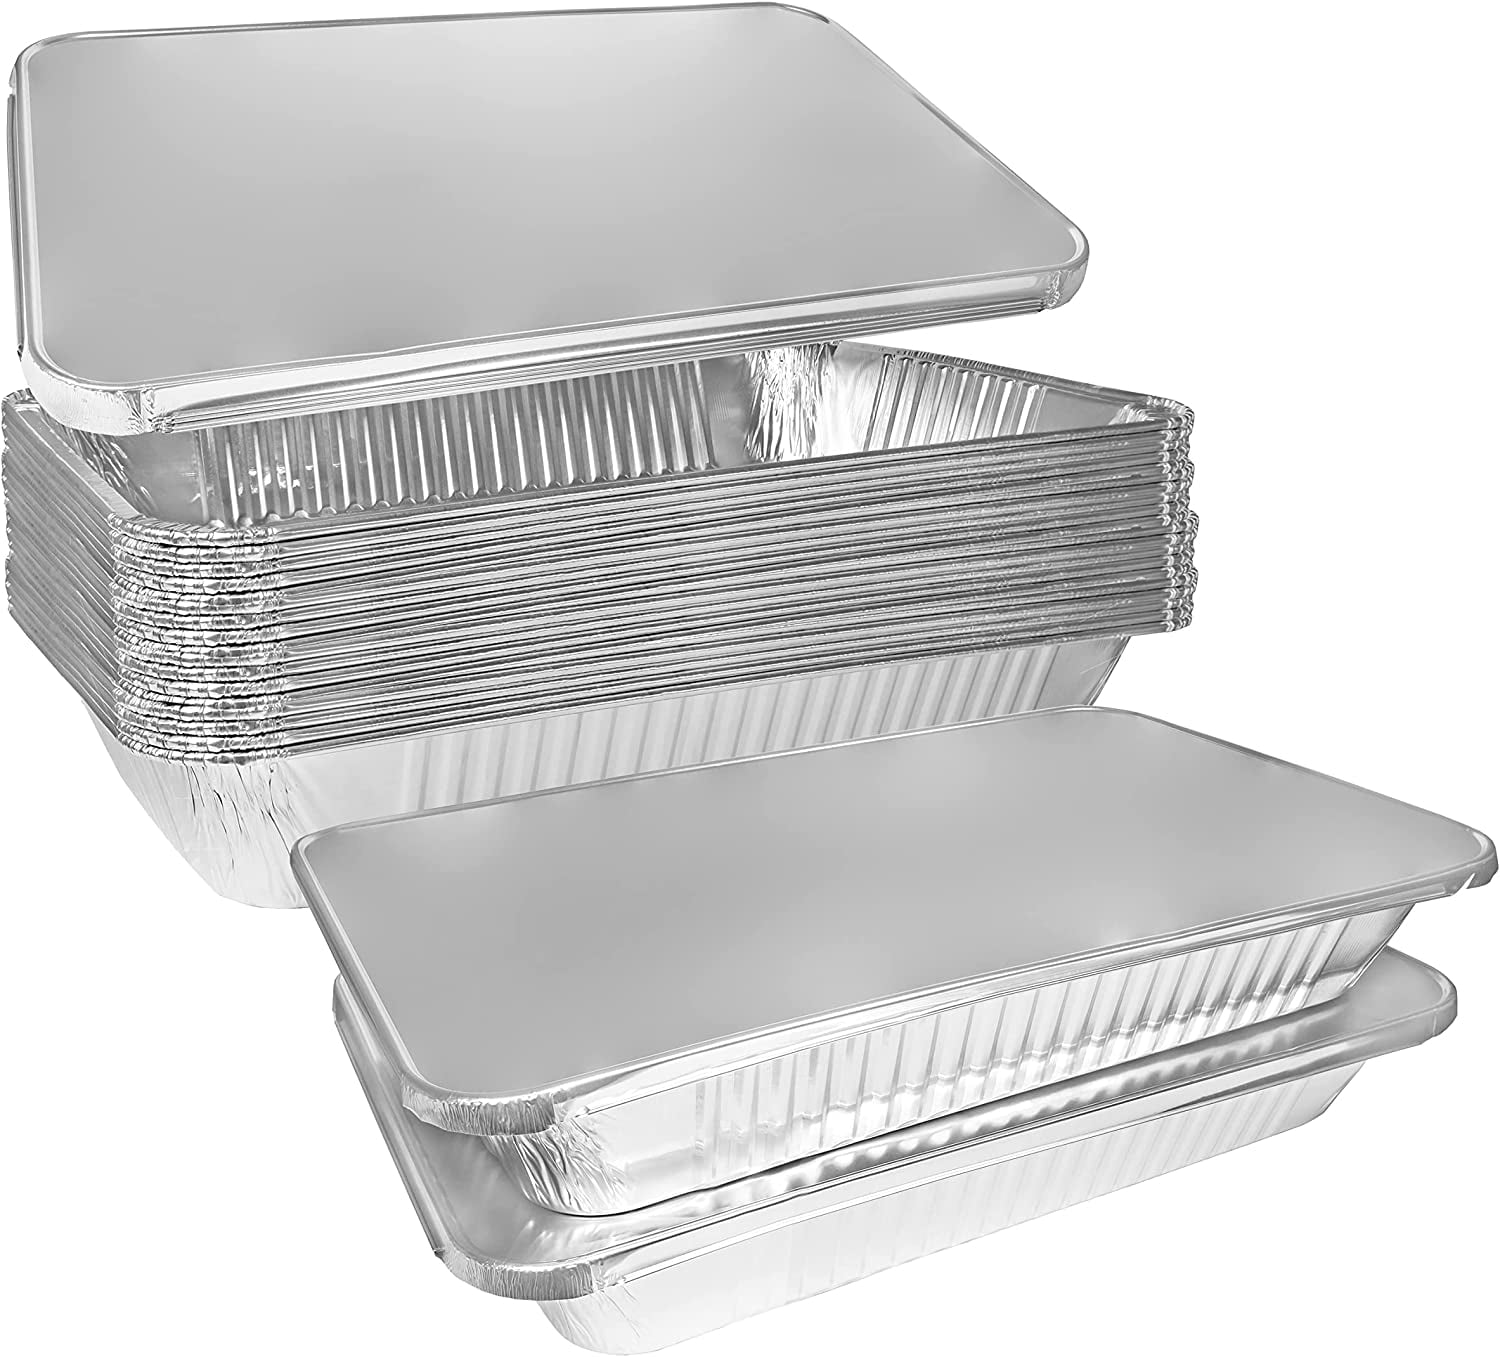 Disposable Half Size 9X13 Inch Aluminum Foil Steam Table Grill